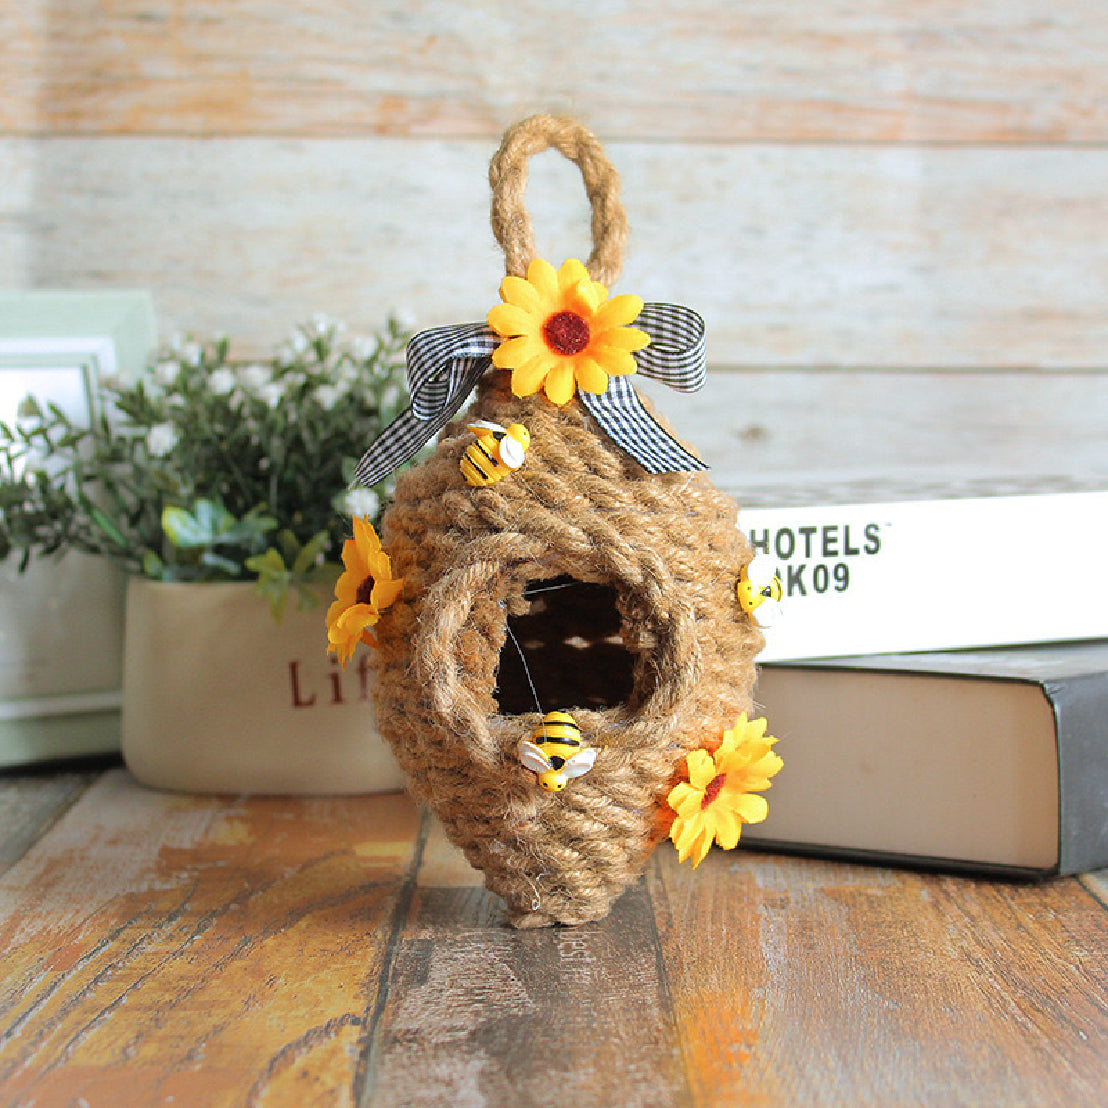 Sunflower Round Honeycomb Decoration, 3.94 x 7.09 Inches, Beehive Woven Hemp Rope Honeycomb Hanging Ring Balcony Decor, Farmhouse Spring Decor Bee-Themed Party